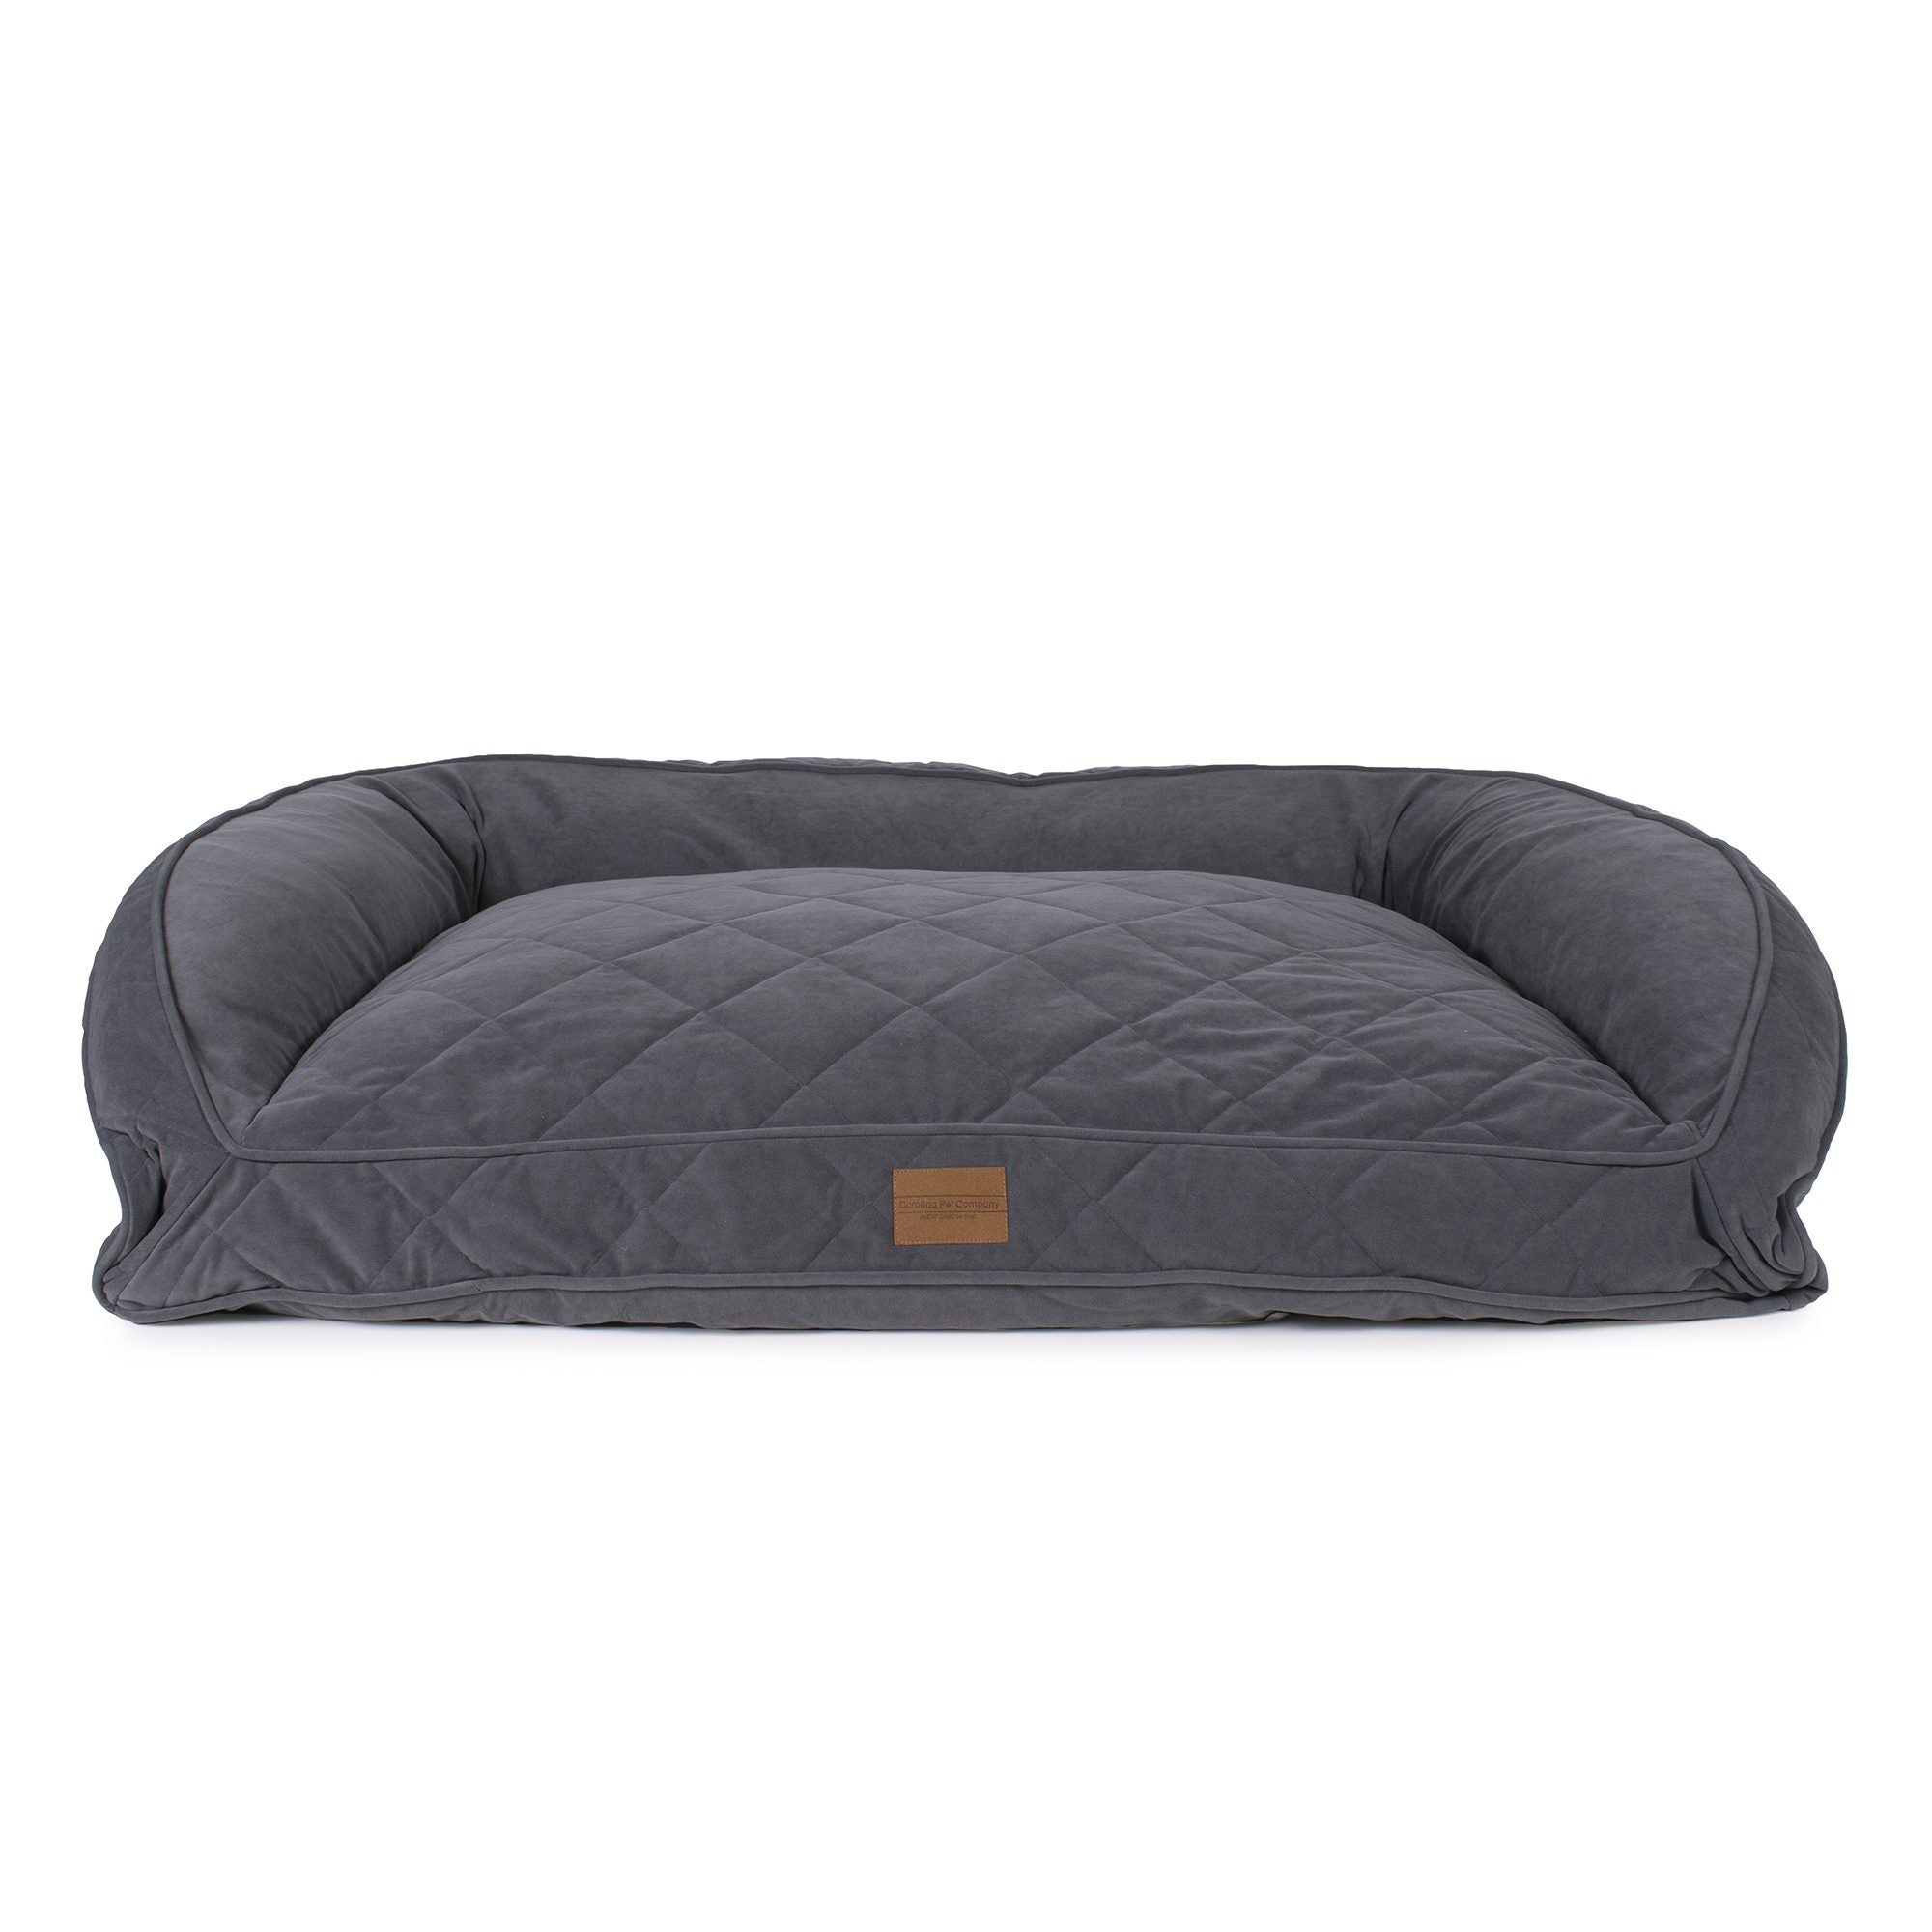 QUILTED-MICROFIBER-ORTHOPEDIC-DOG-BED-CHARCOAL